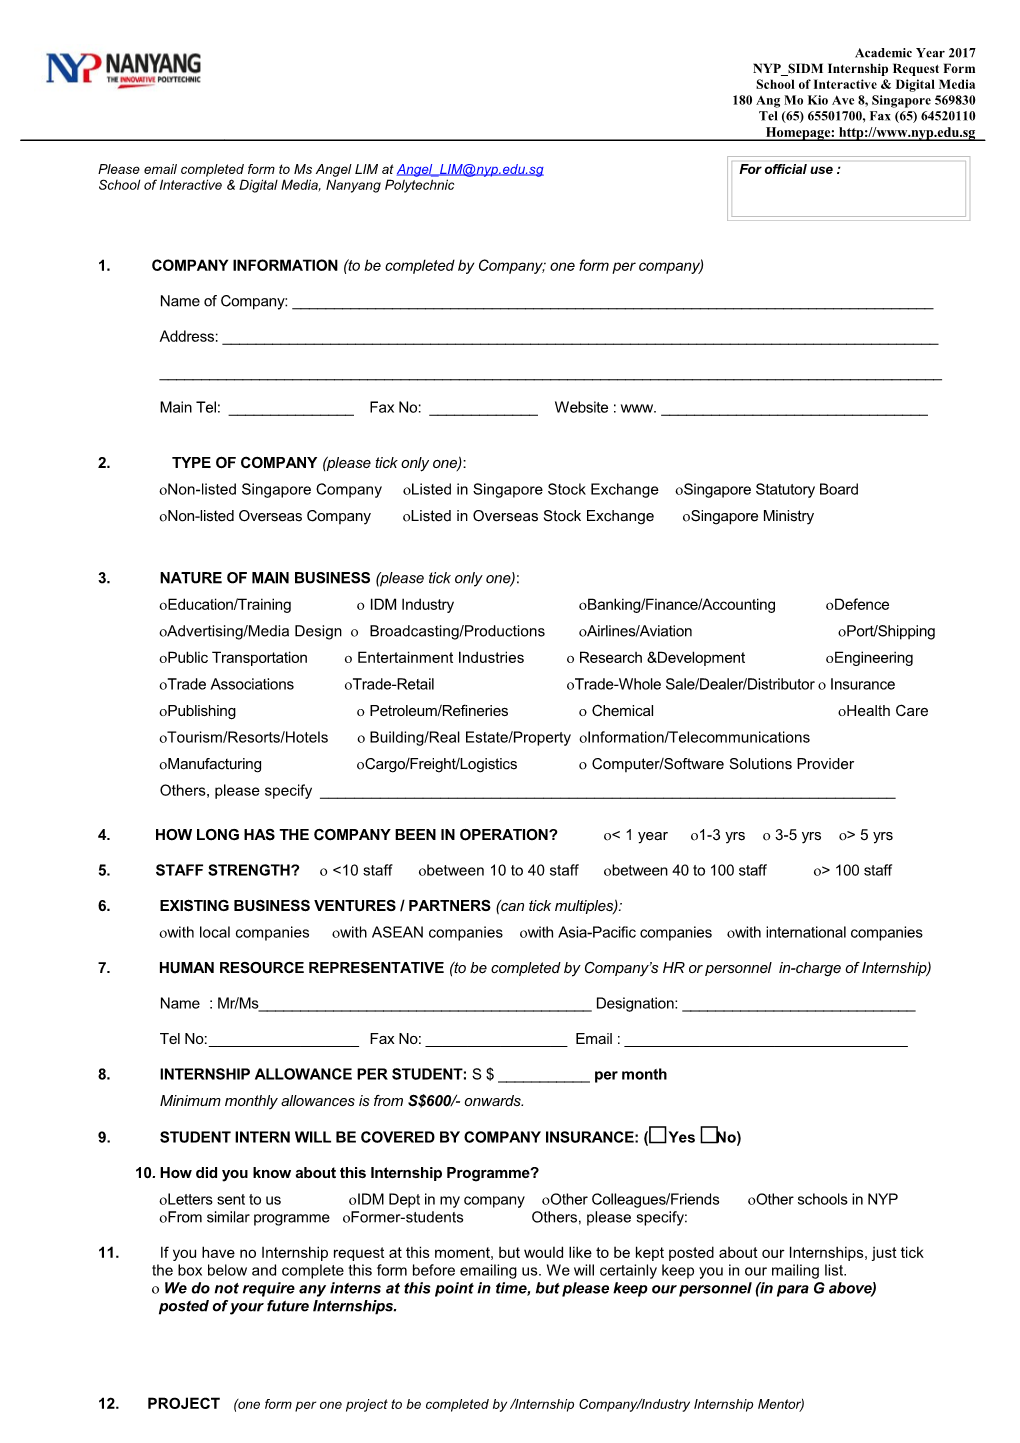 1. COMPANY INFORMATION (To Be Completed by Company; One Form Per Company)